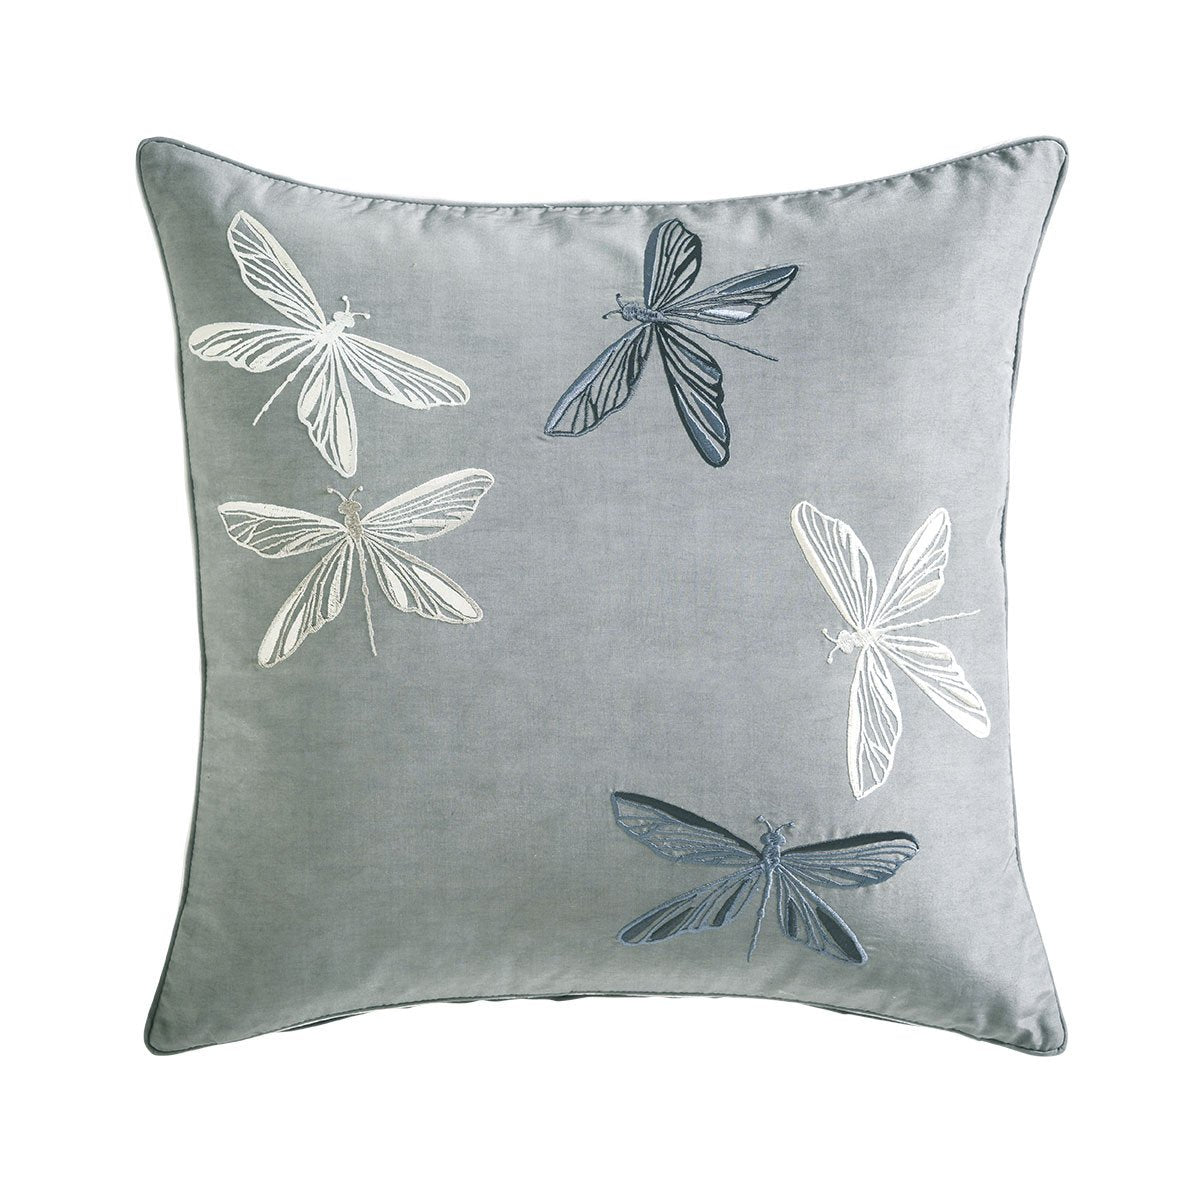 Yves Delorme Lubie Argent Accent Pillow